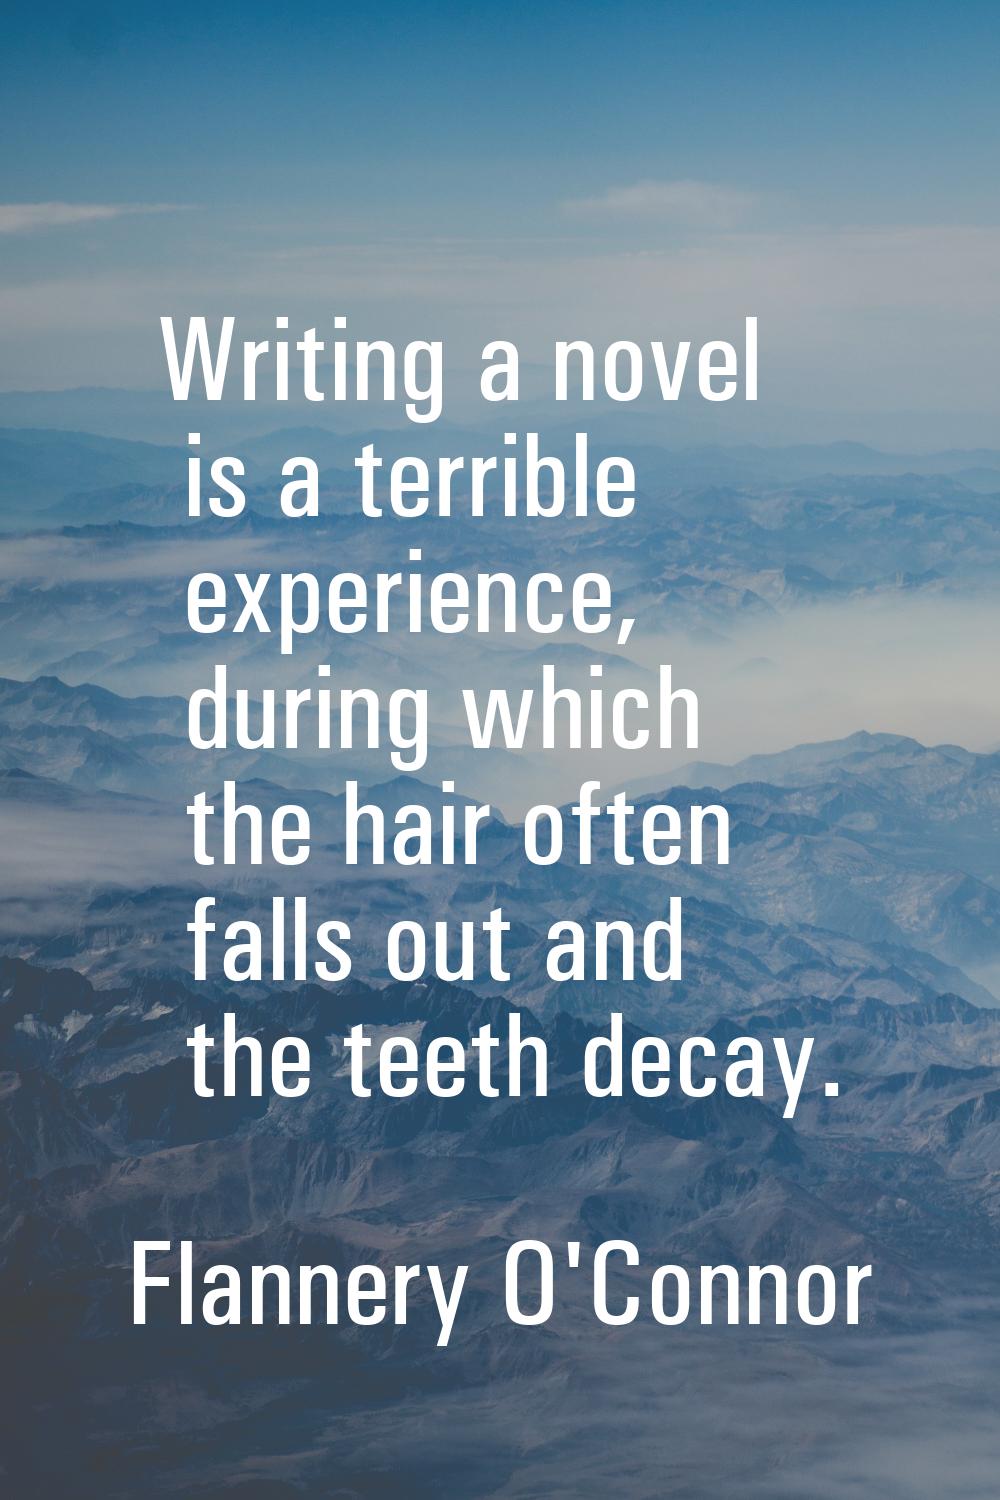 Writing a novel is a terrible experience, during which the hair often falls out and the teeth decay